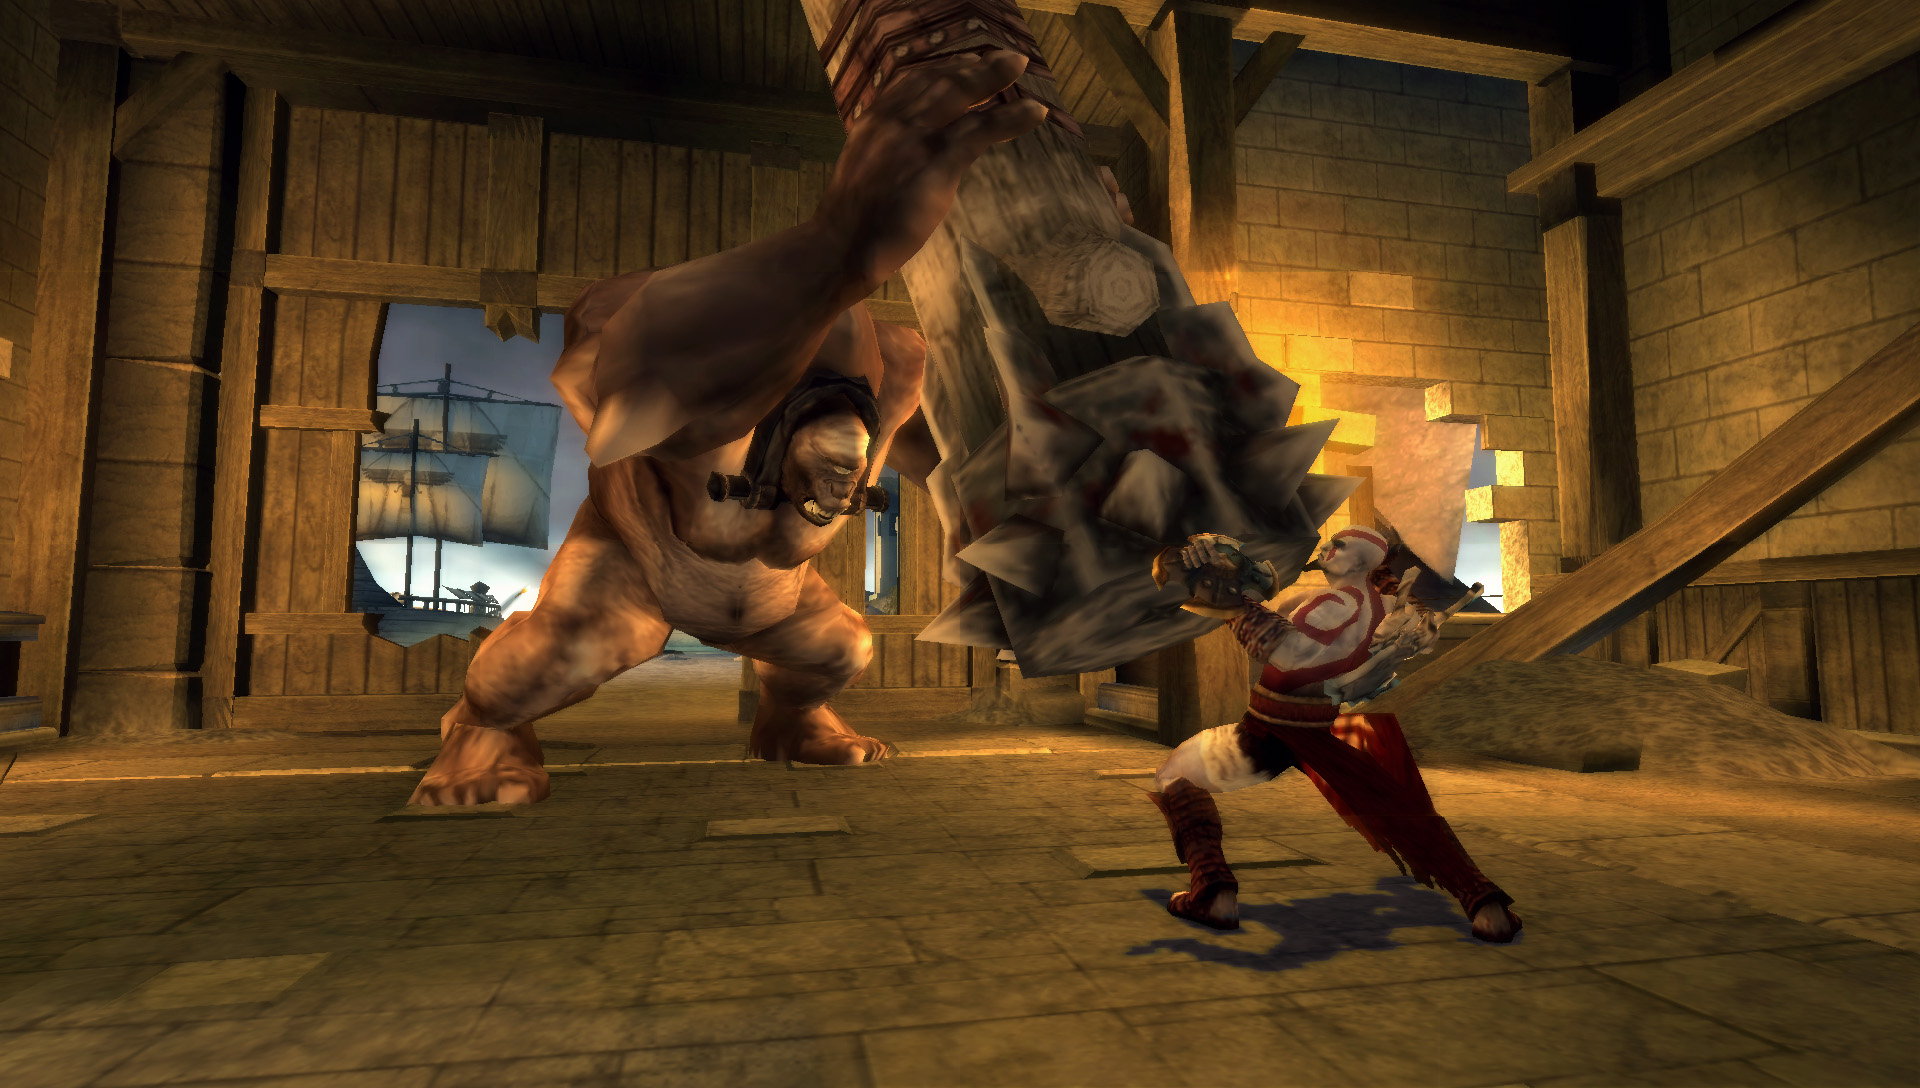 God of War' for PSP is a must-play game